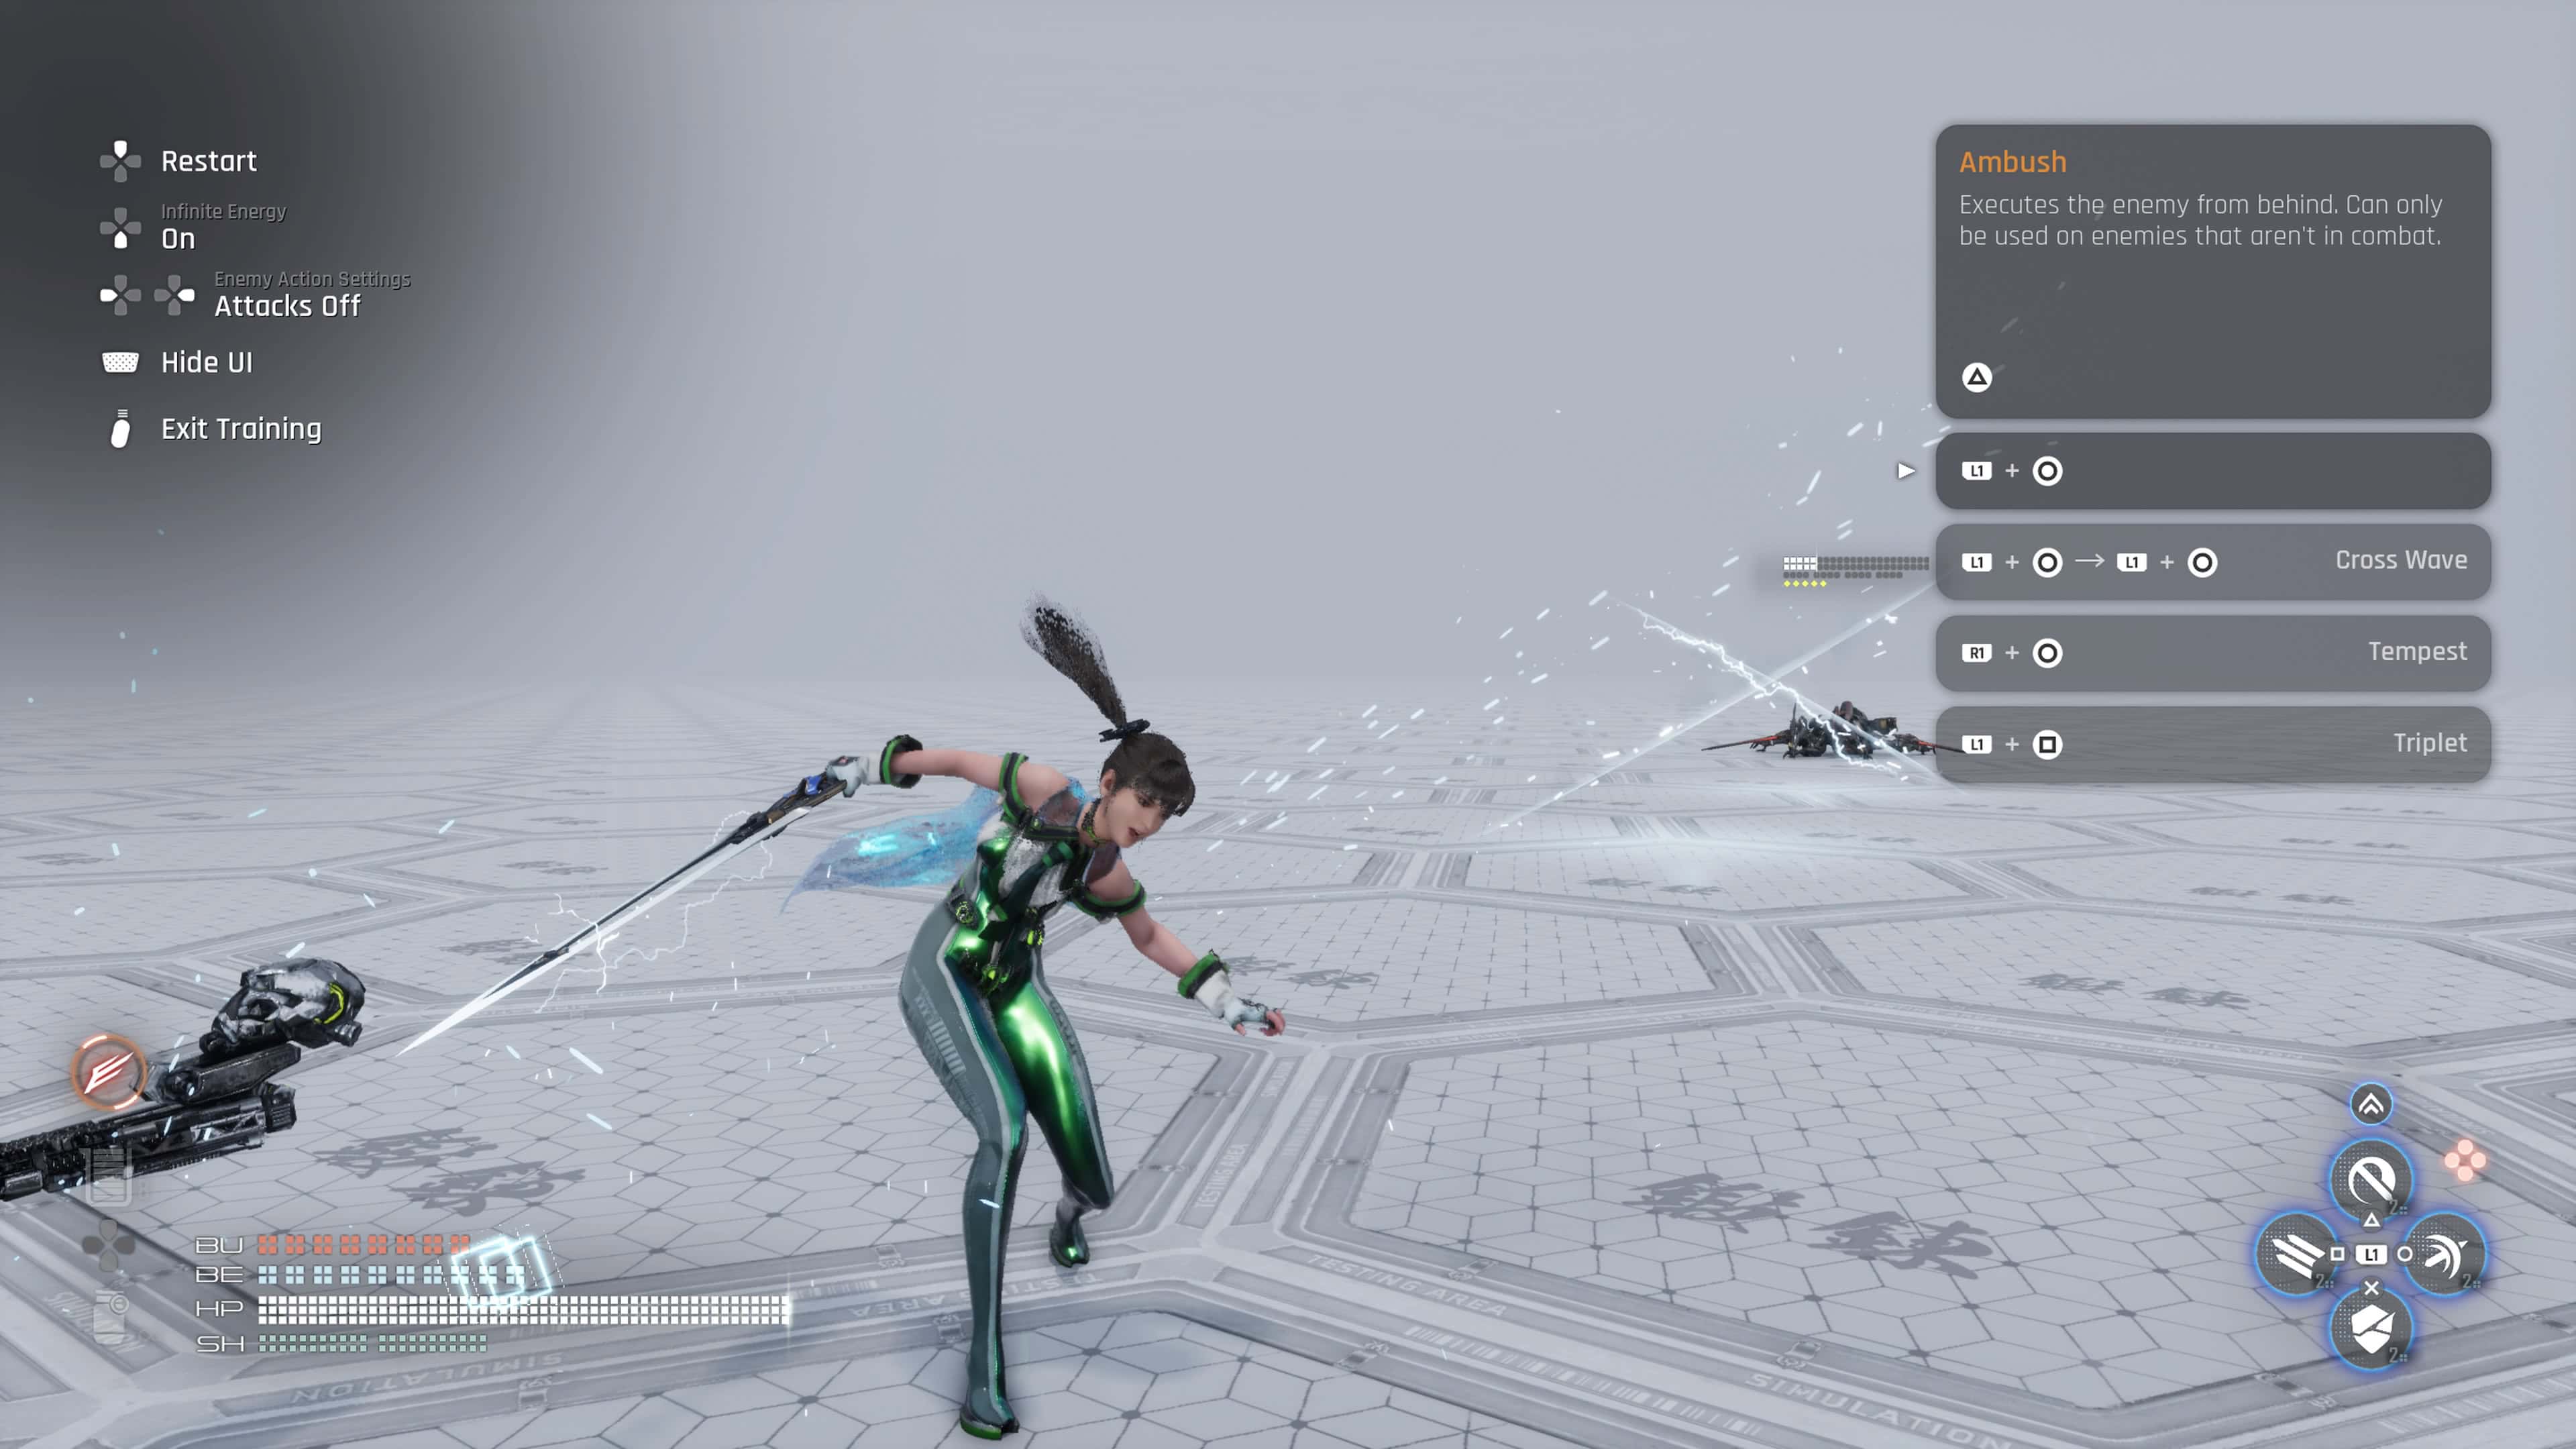 Stellar Blade - EVE uses an attack on enemy in the training room.